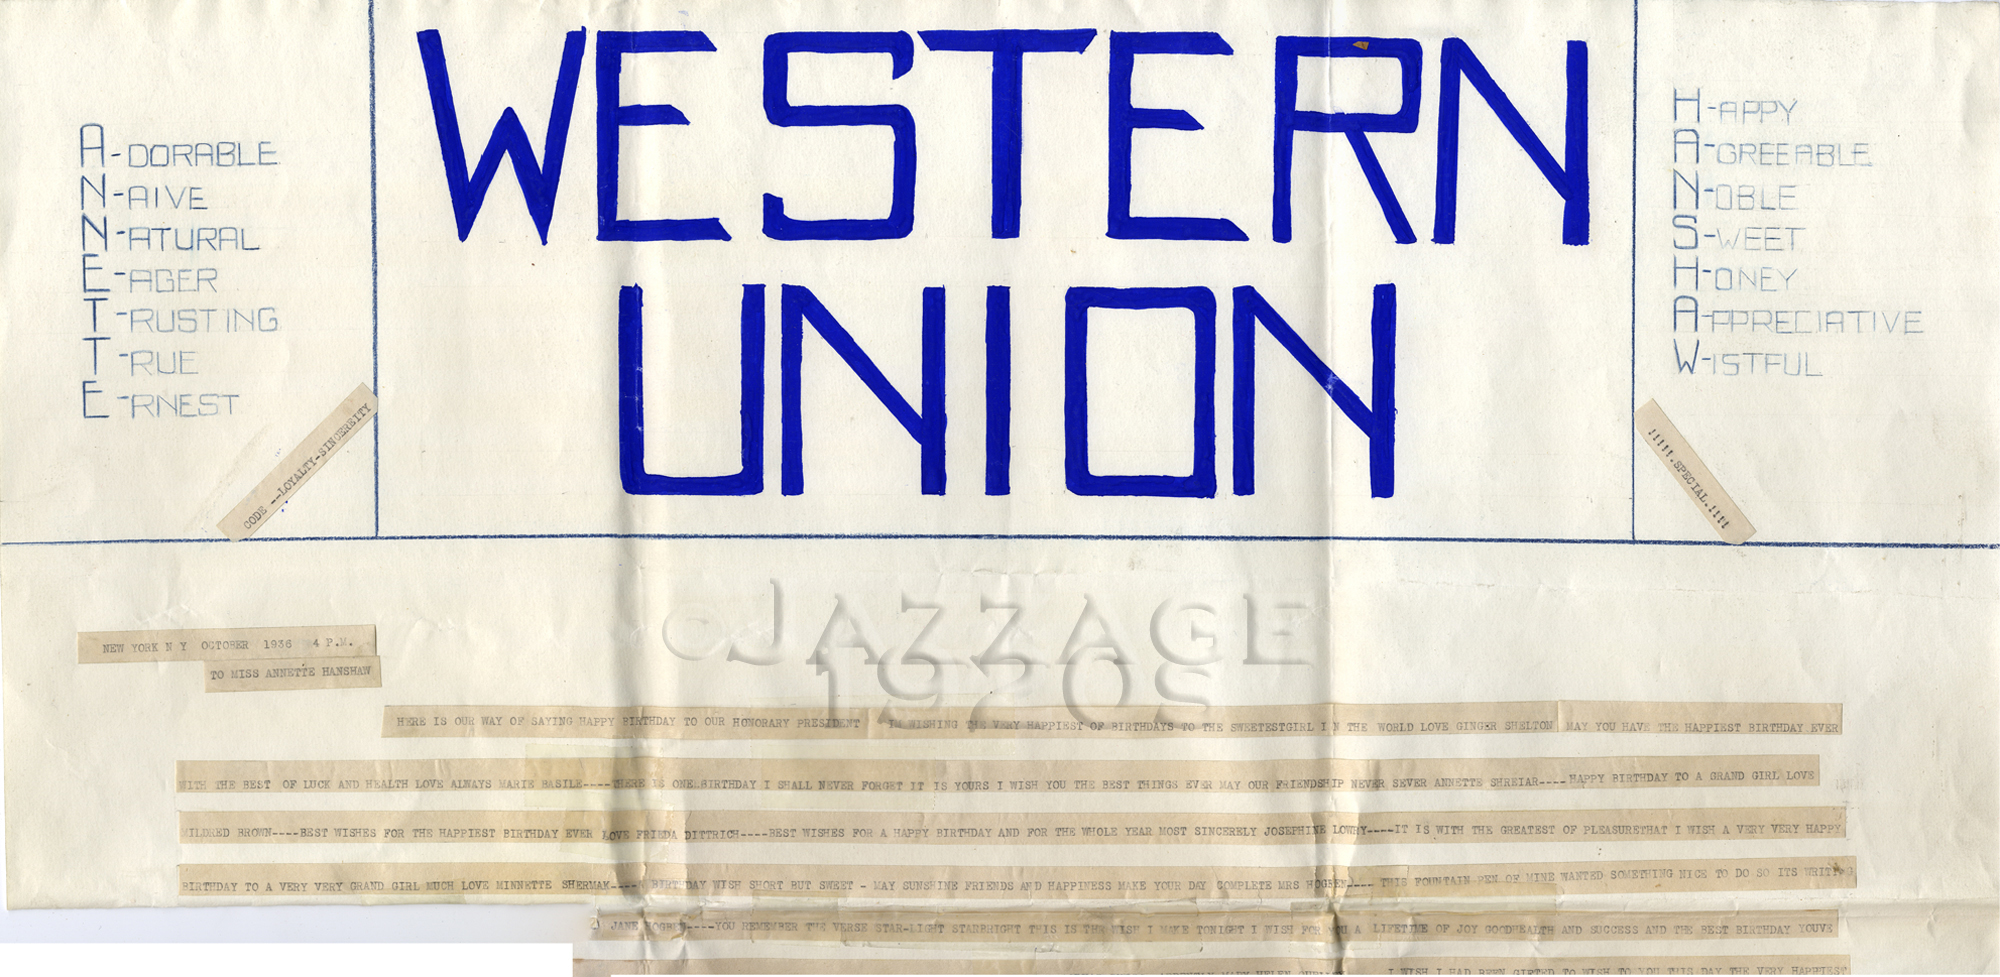 Western Union Telegram (Top) From a Group of Annette’s Fans October 1936